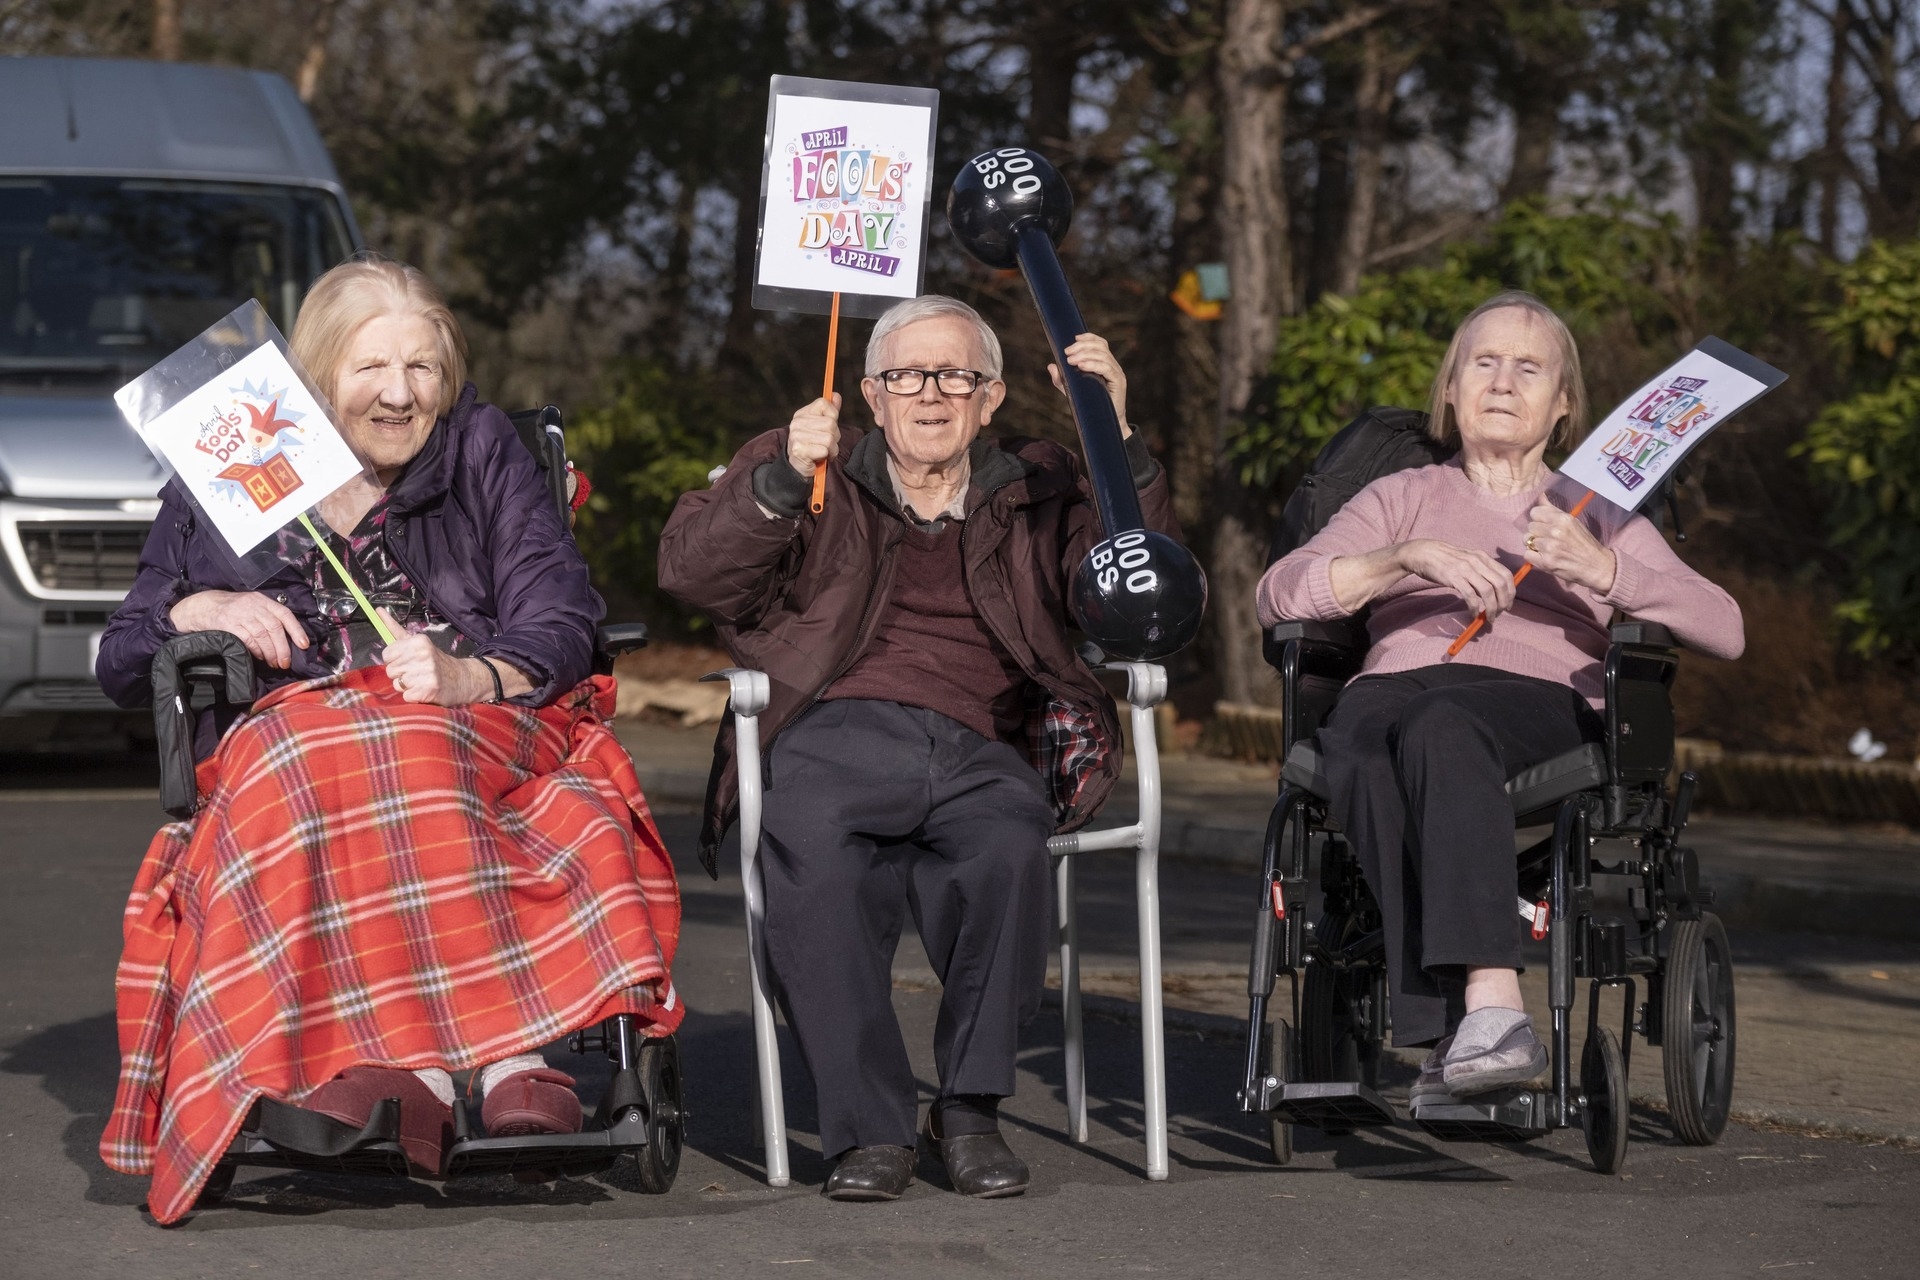 Residents at Renaissance Care's Whitecraigs Care Home in Thornliebank have been awarded with a ‘Growing Old Disgracefully’ title at the NAPA Awards.